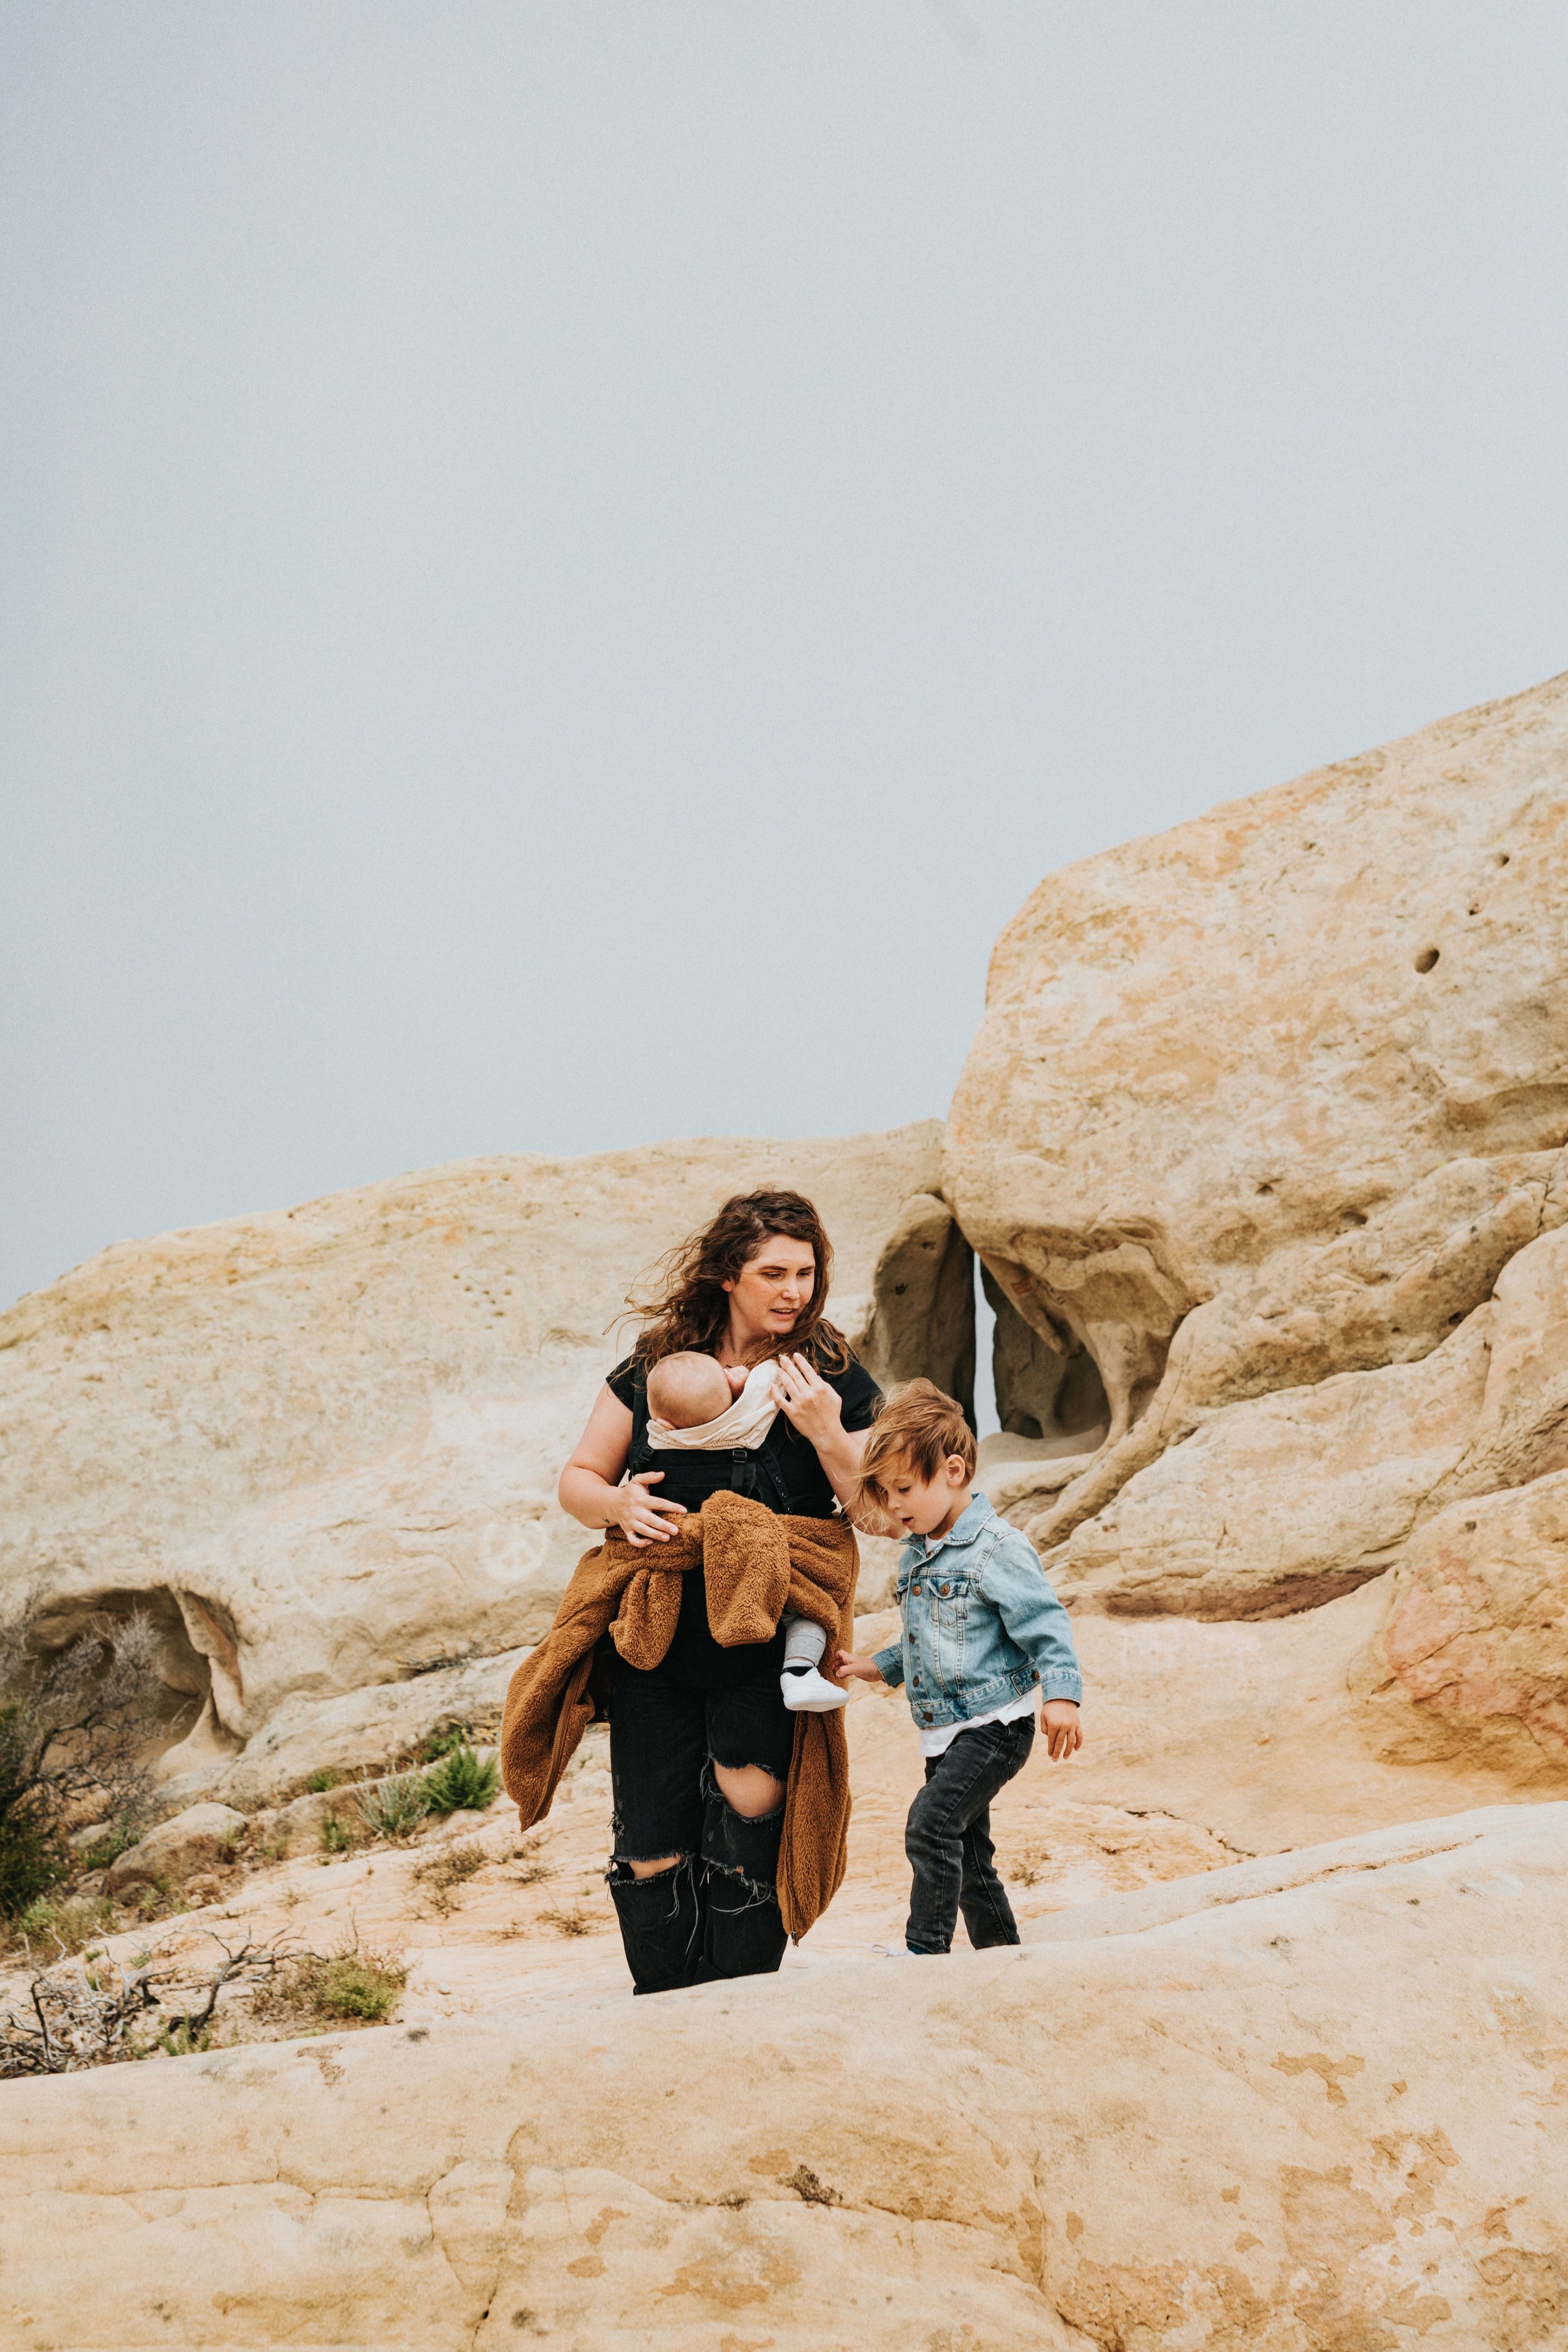 nathan-dumlao-6 Ways To Make Traveling With Kids Less Stressful :: Guest Post unsplash.jpg